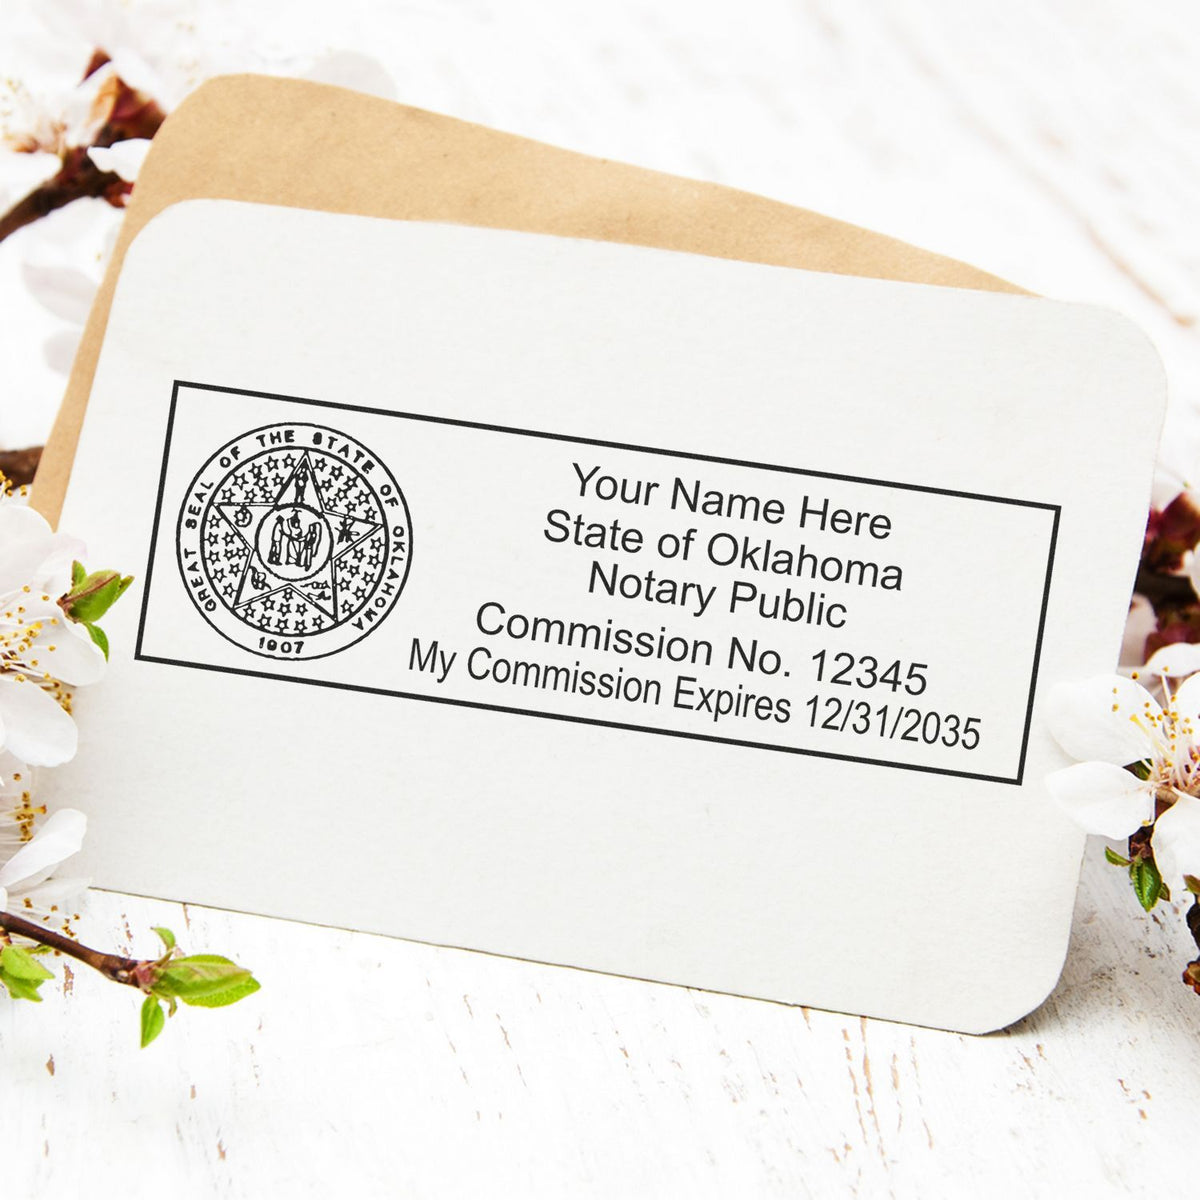 A lifestyle photo showing a stamped image of the Heavy-Duty Oklahoma Rectangular Notary Stamp on a piece of paper